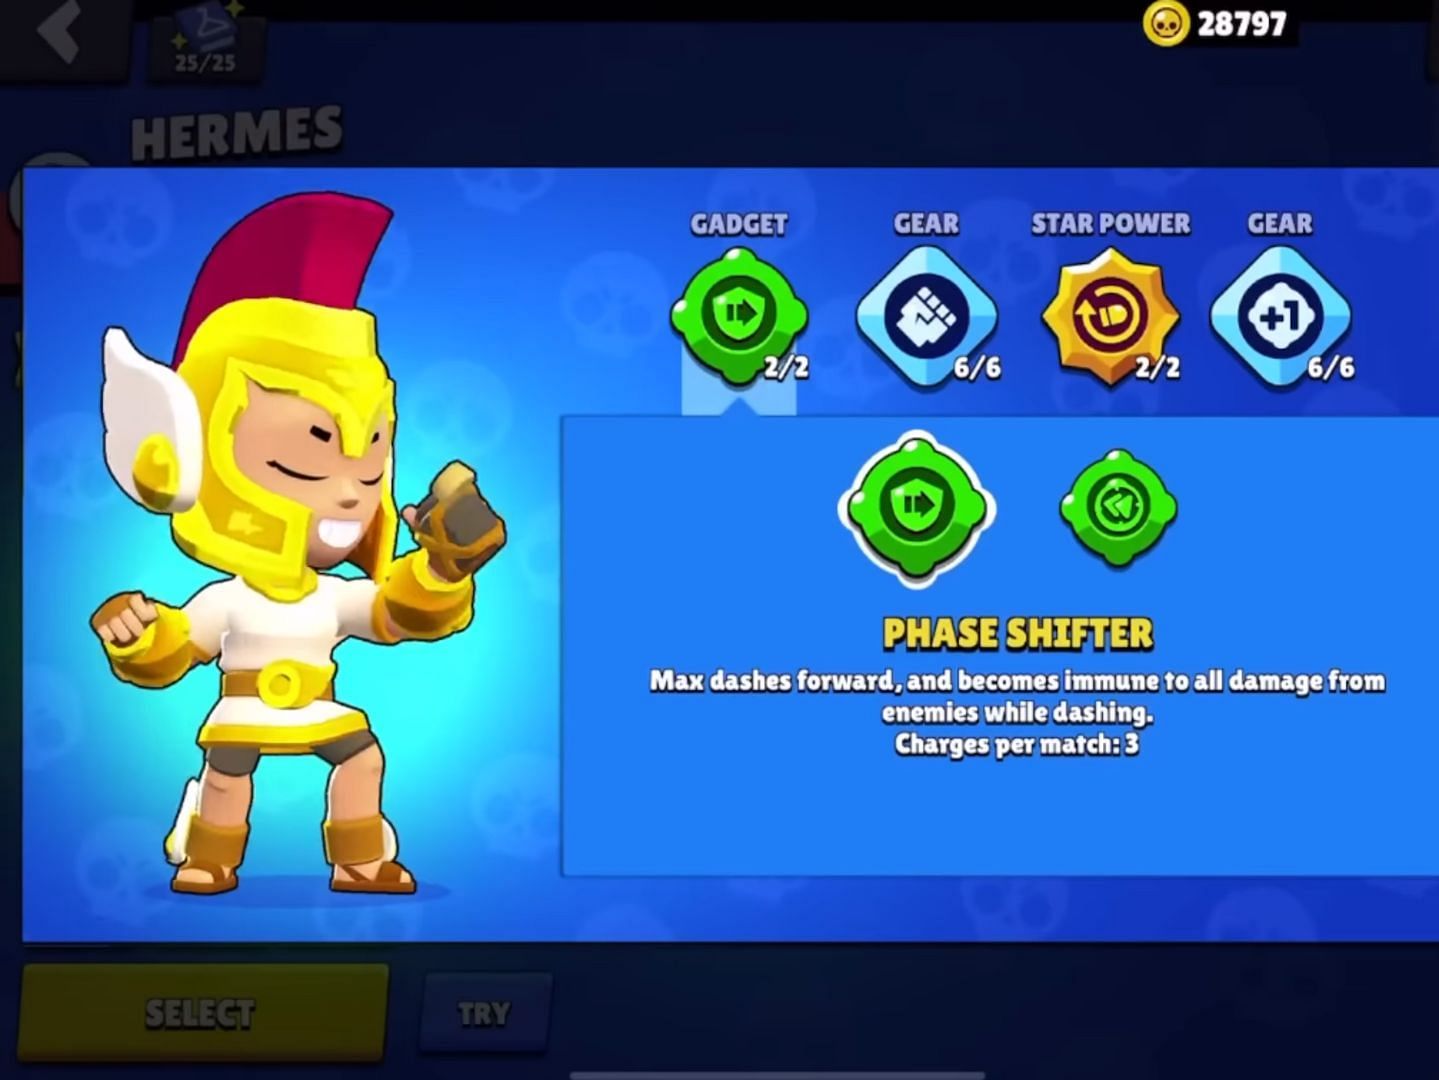 Phase Shifter Gadget (Image via Supercell)